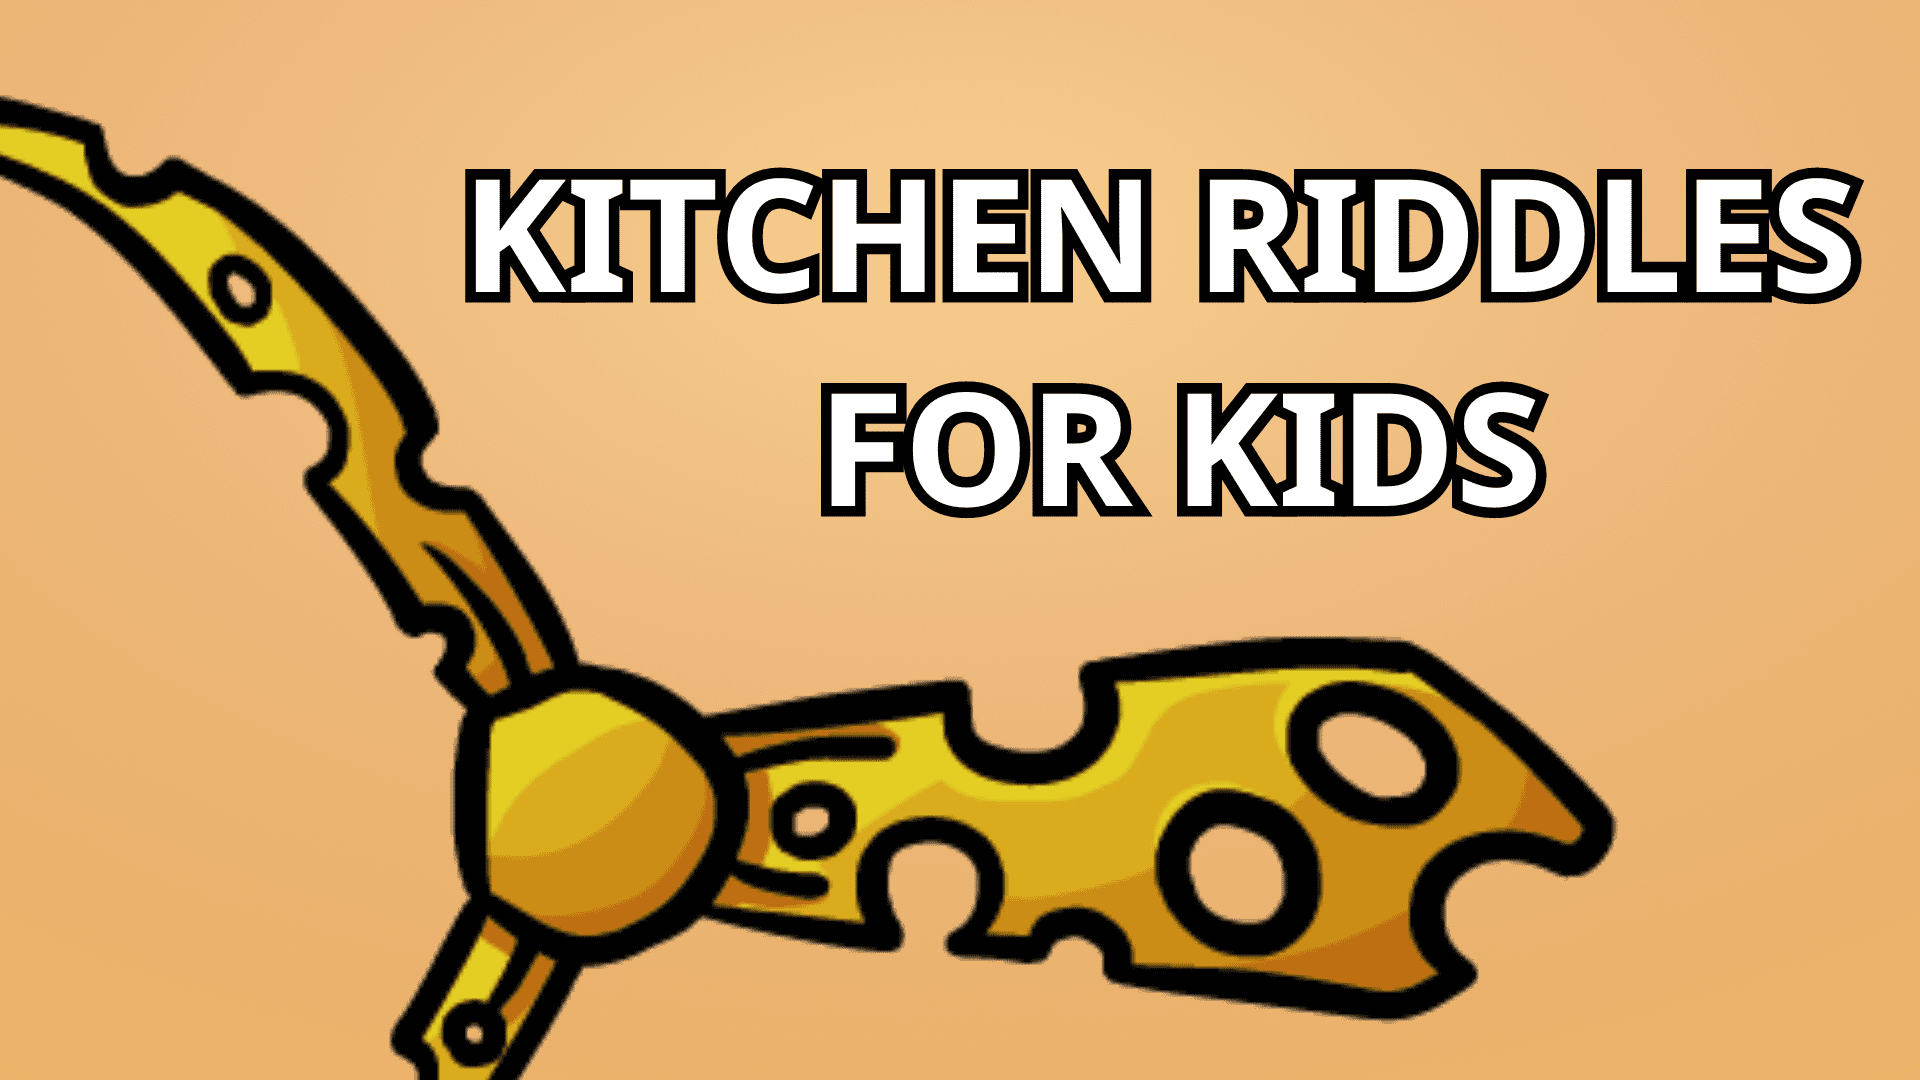 A yellow cheese tie with cheese holes. The text "Kitchen Riddles for Kids" against a peach-colored background.